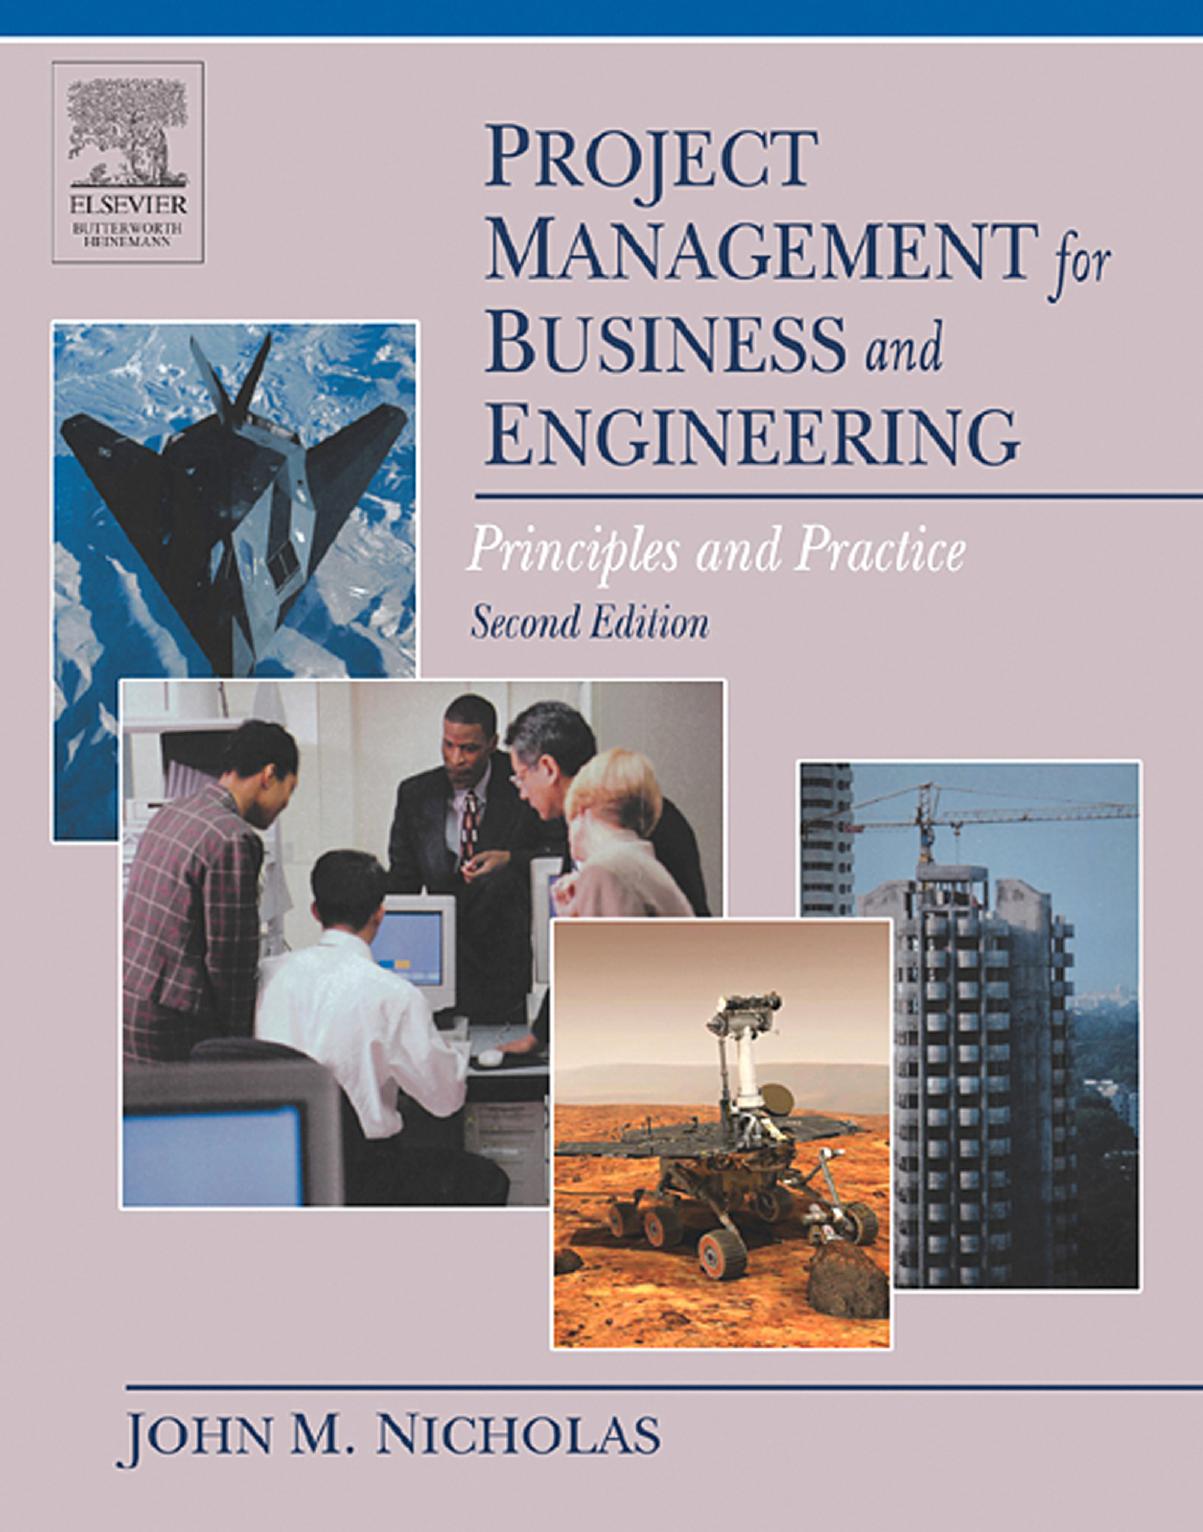 Project Management for Business and Engineering  Second Edition  Principles and Practice 2004